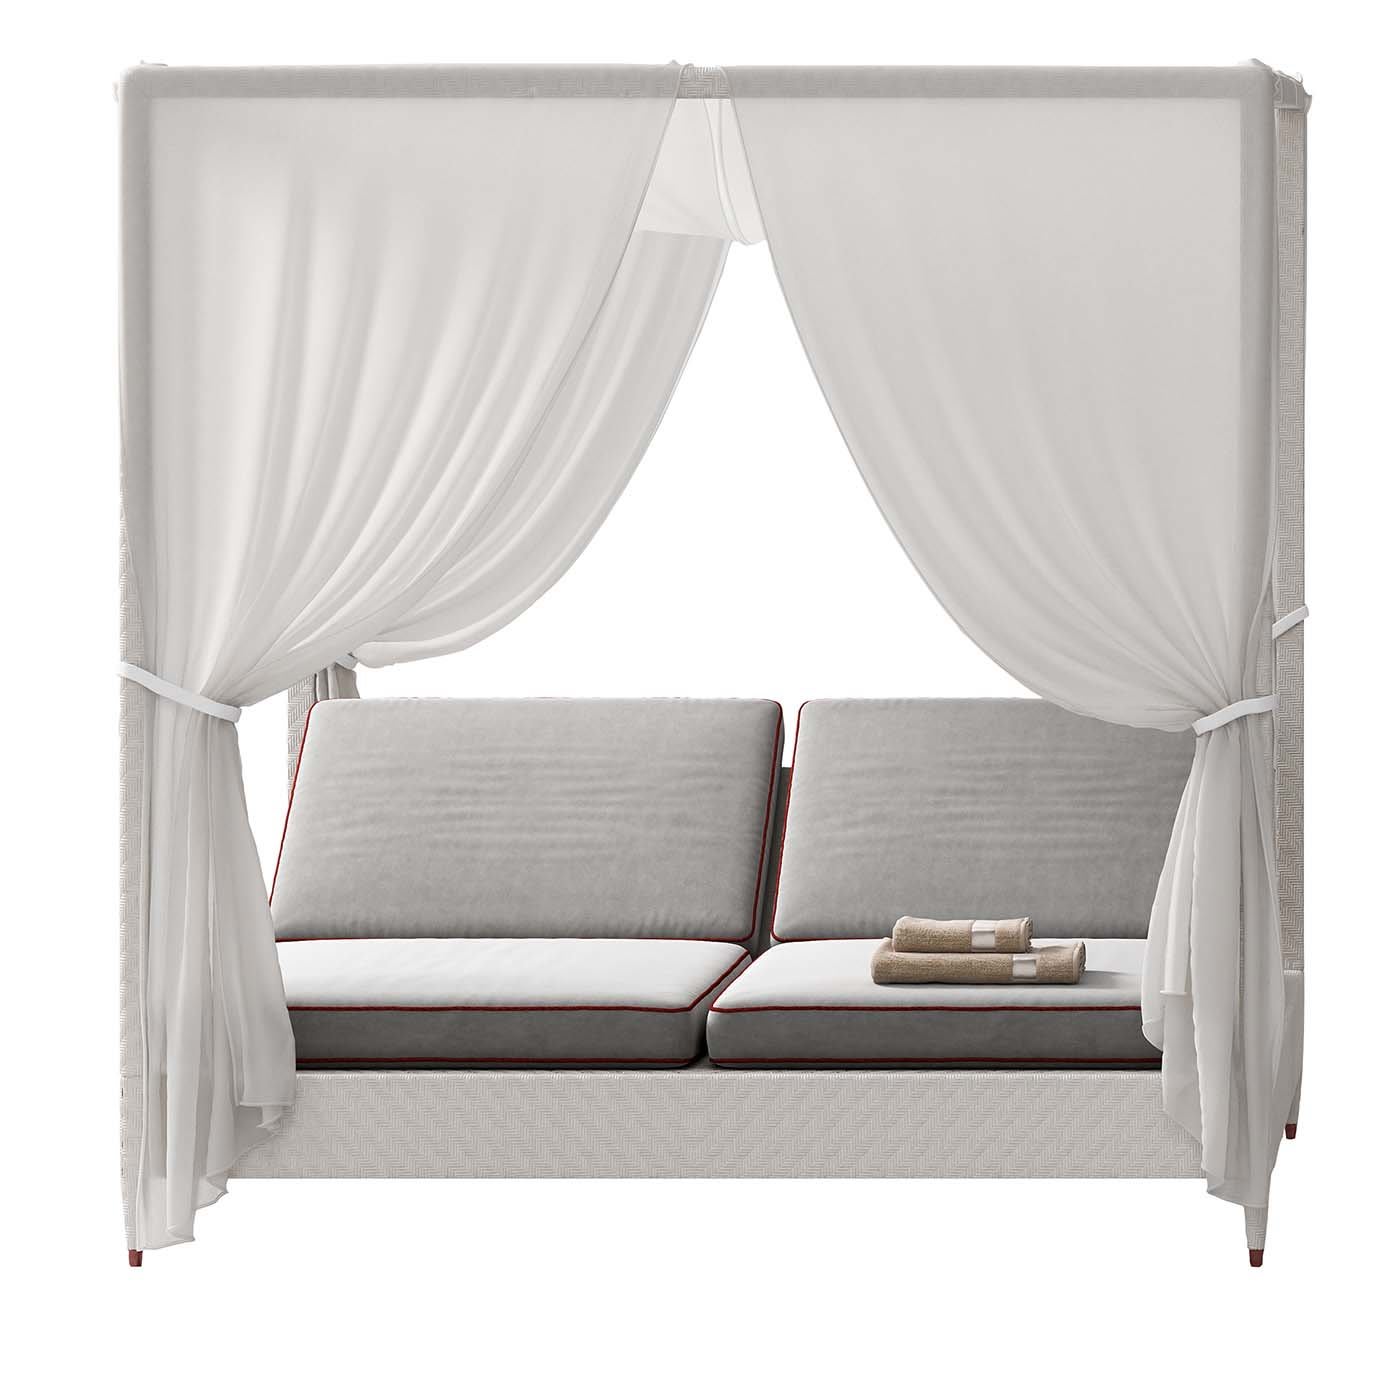 White 2-Seater Daybed with Canopy - CPRN Homood